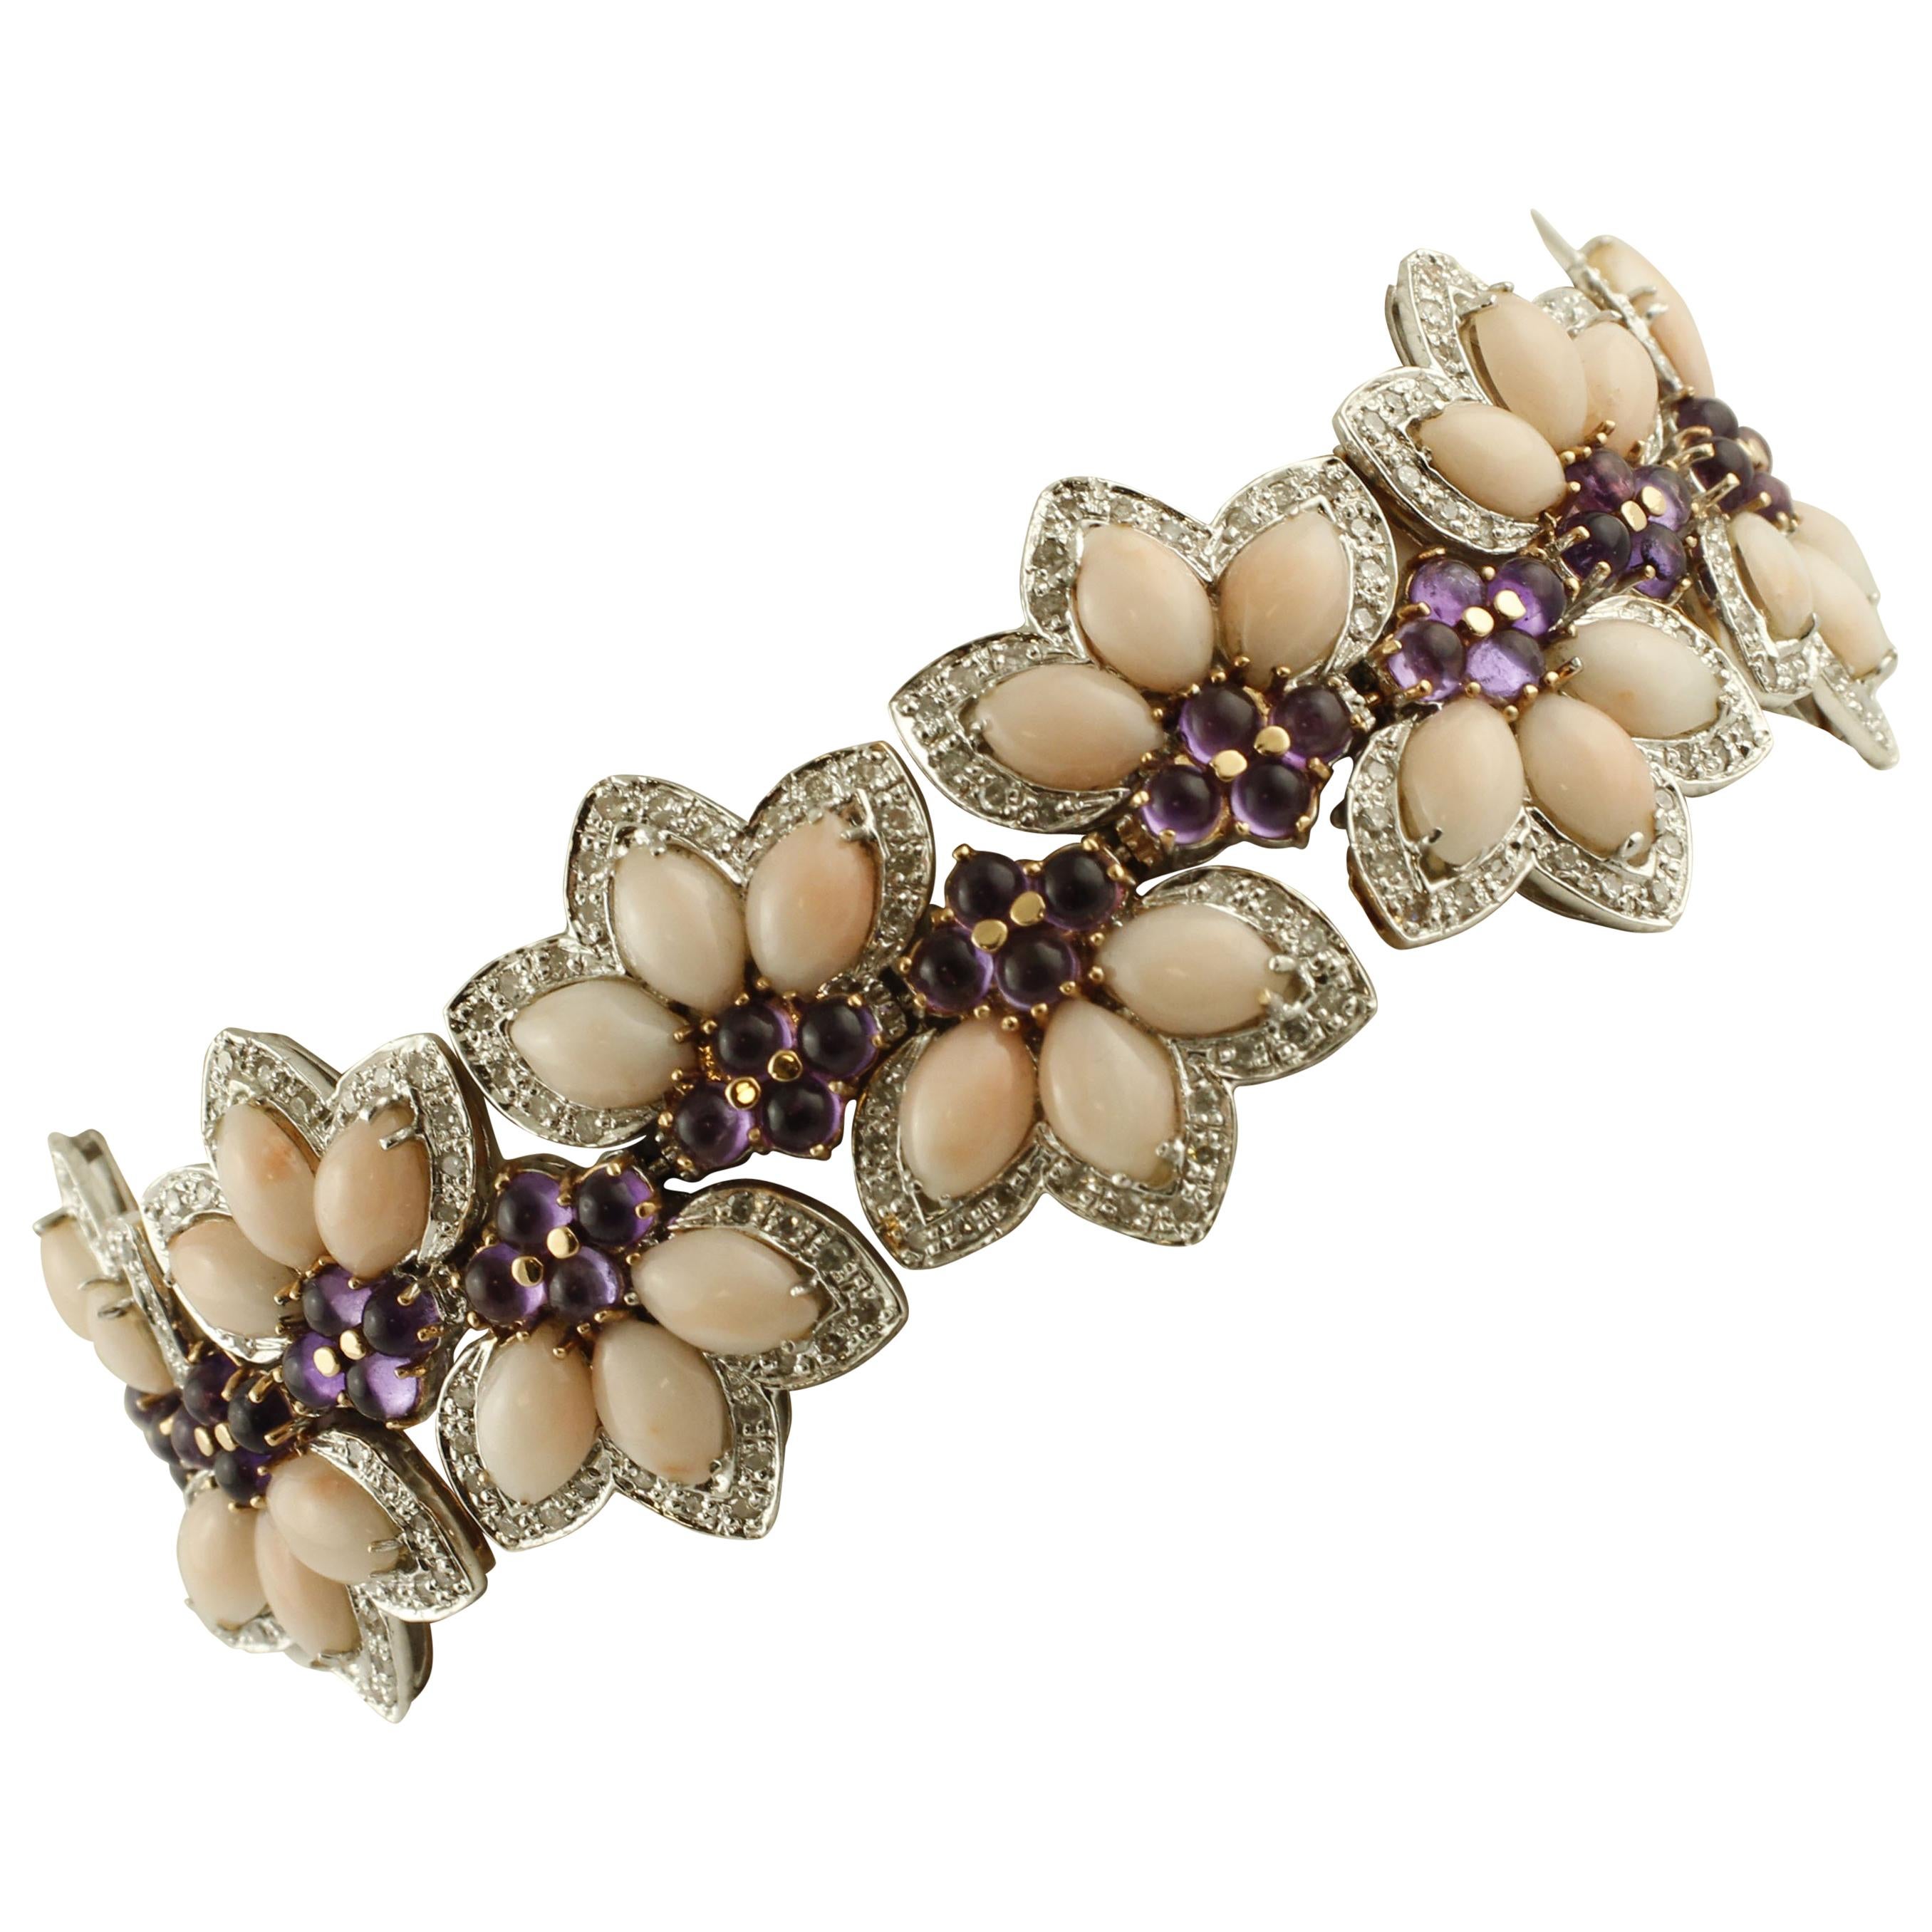 White Diamonds, Amethysts, Pink Coral Drops, White/Rose Gold Flowers Bracelet For Sale